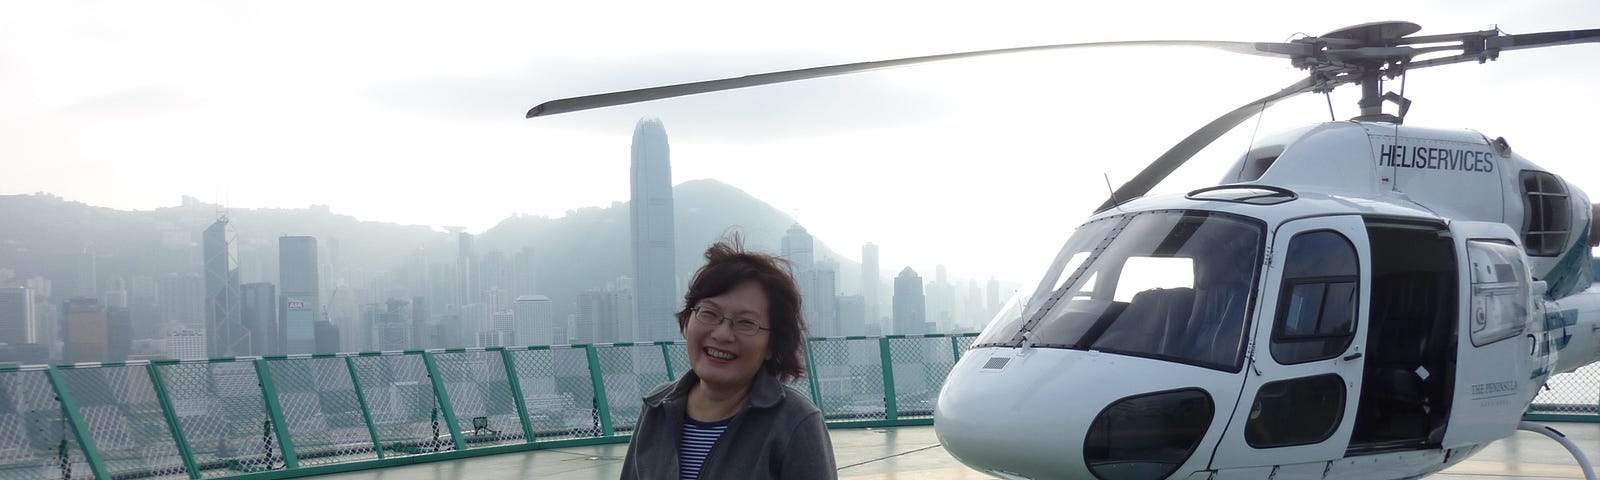 Author in front of a helicopter on top of a building in Hong Kong. The skyline is visible through a haze on the left side of the photo.